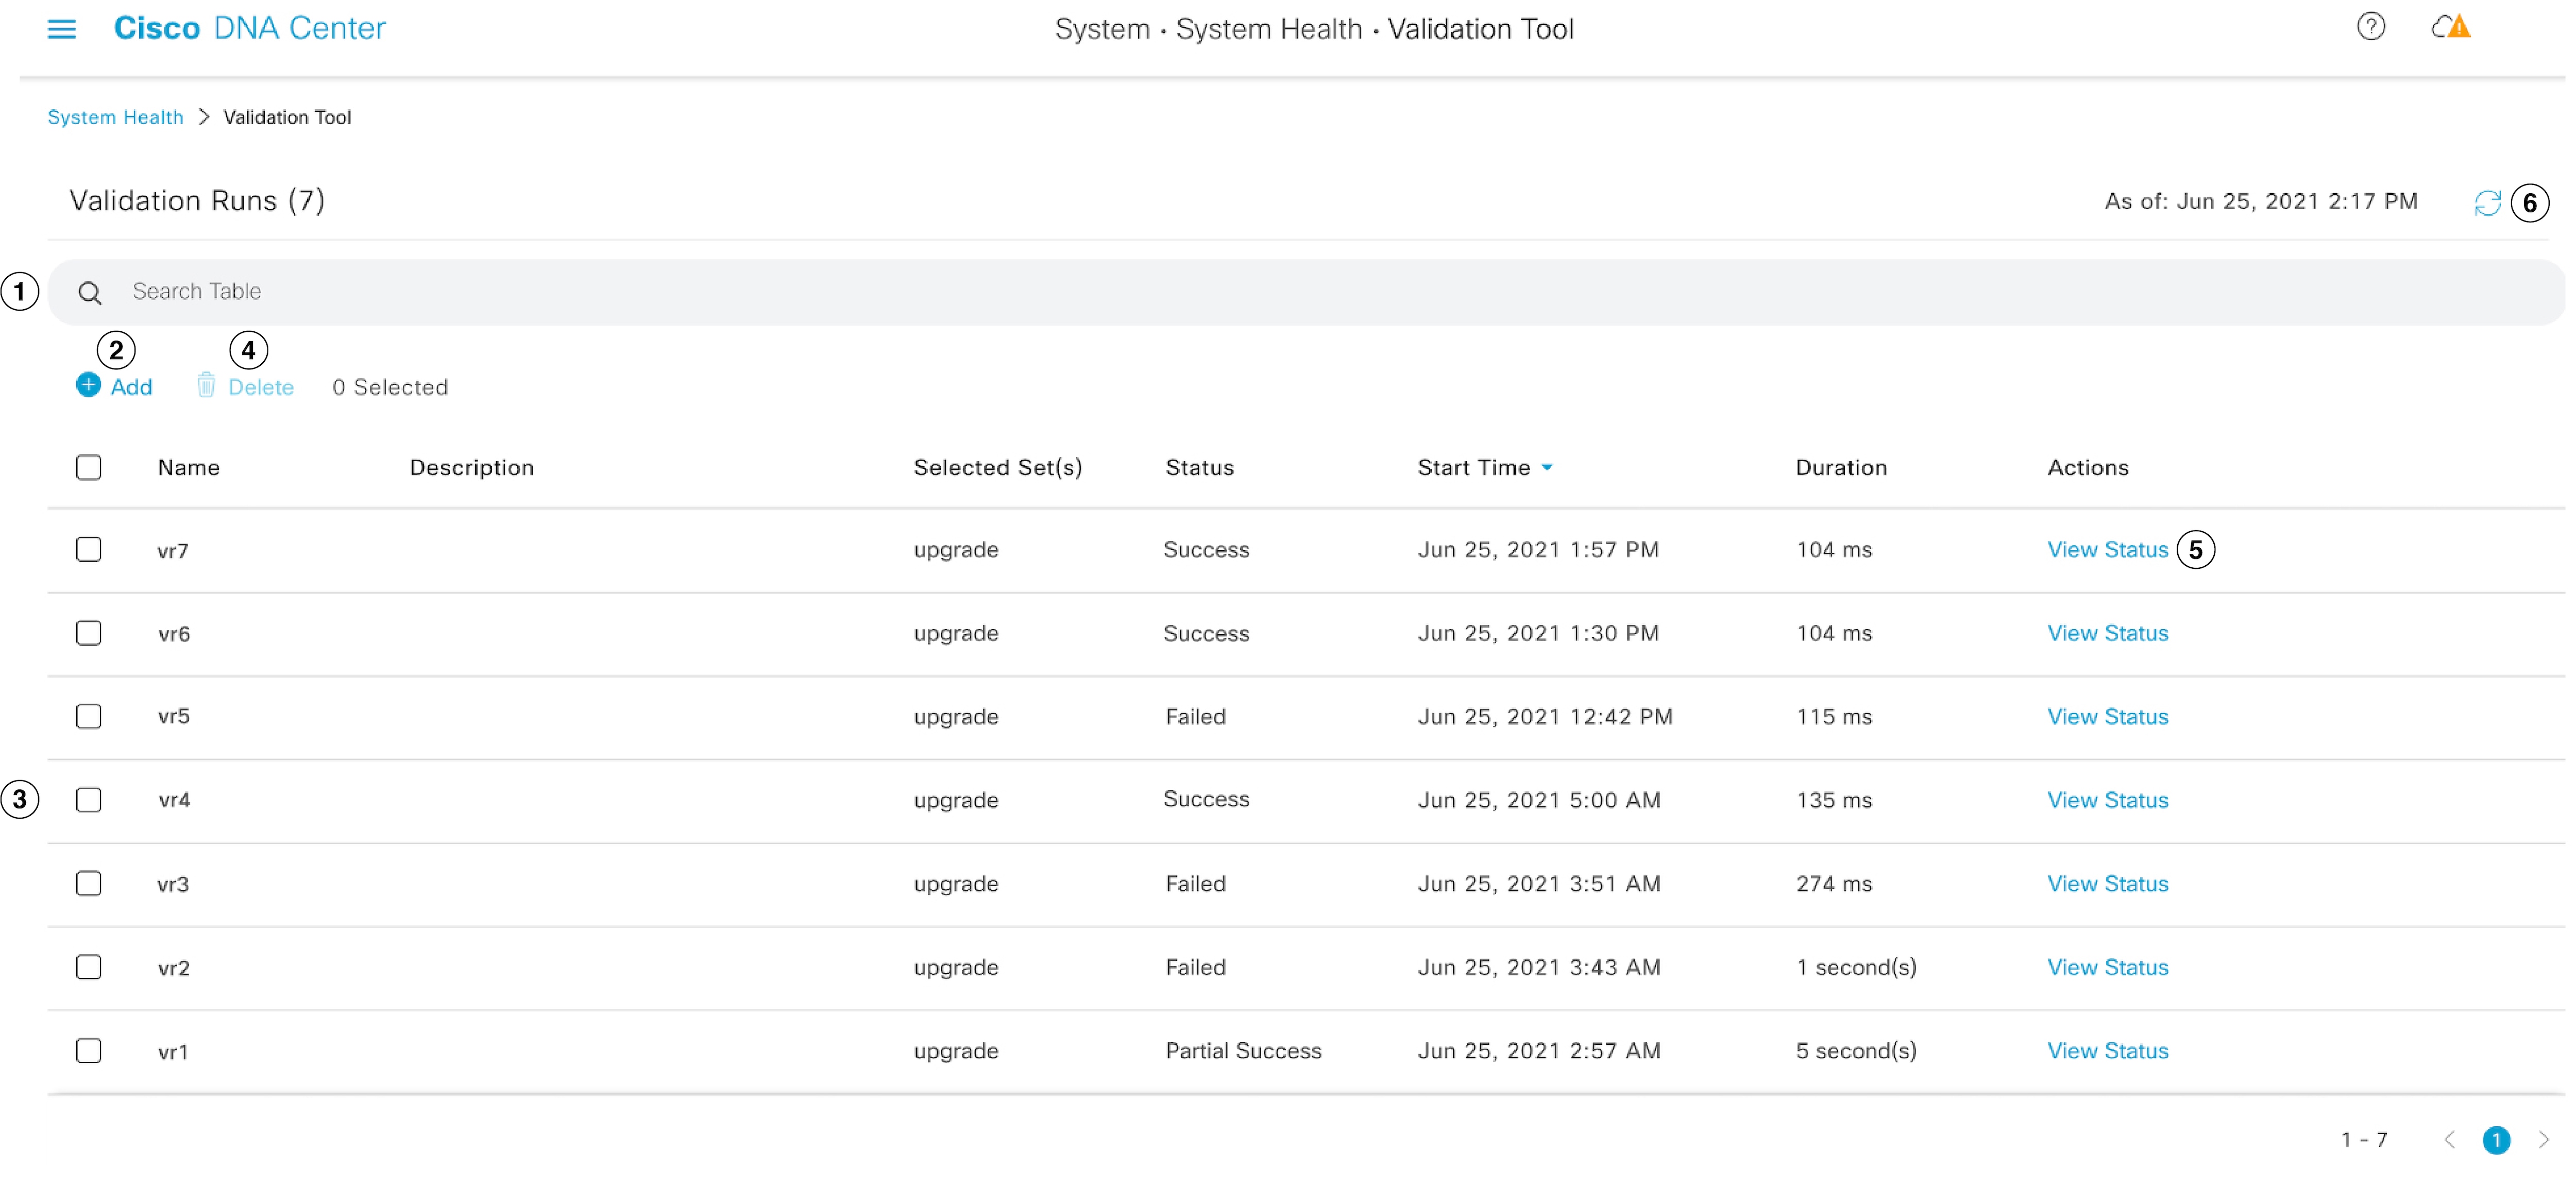 Content of Validation Tool page when the validation run information is available